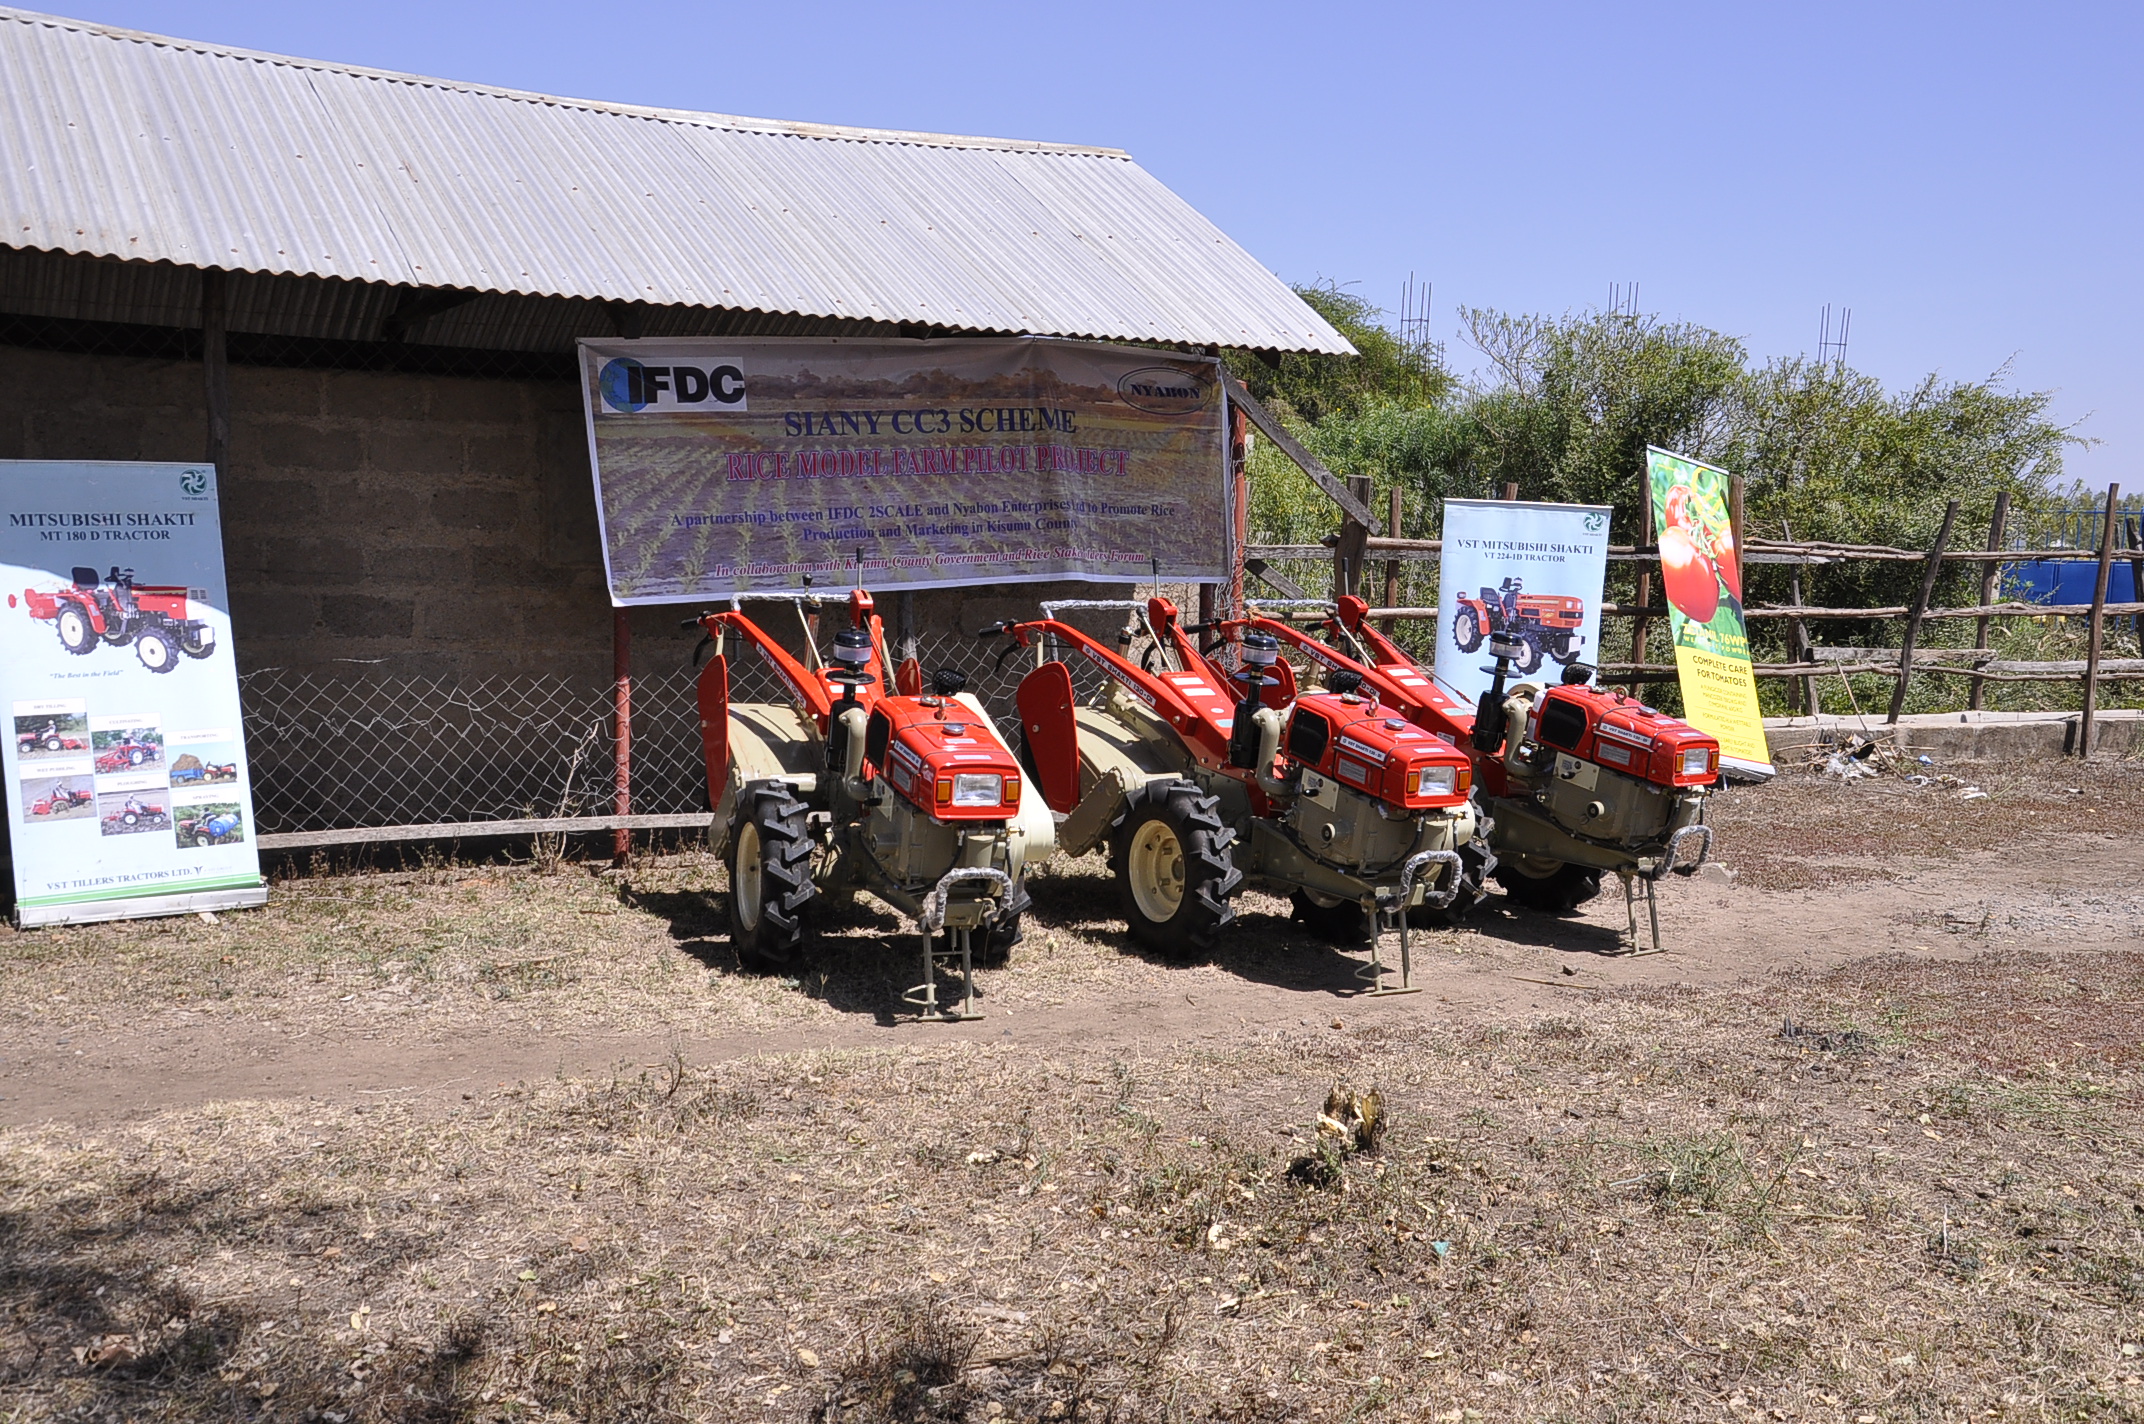 Nyabon Enterprises makes various technologies available for rental by farmers.